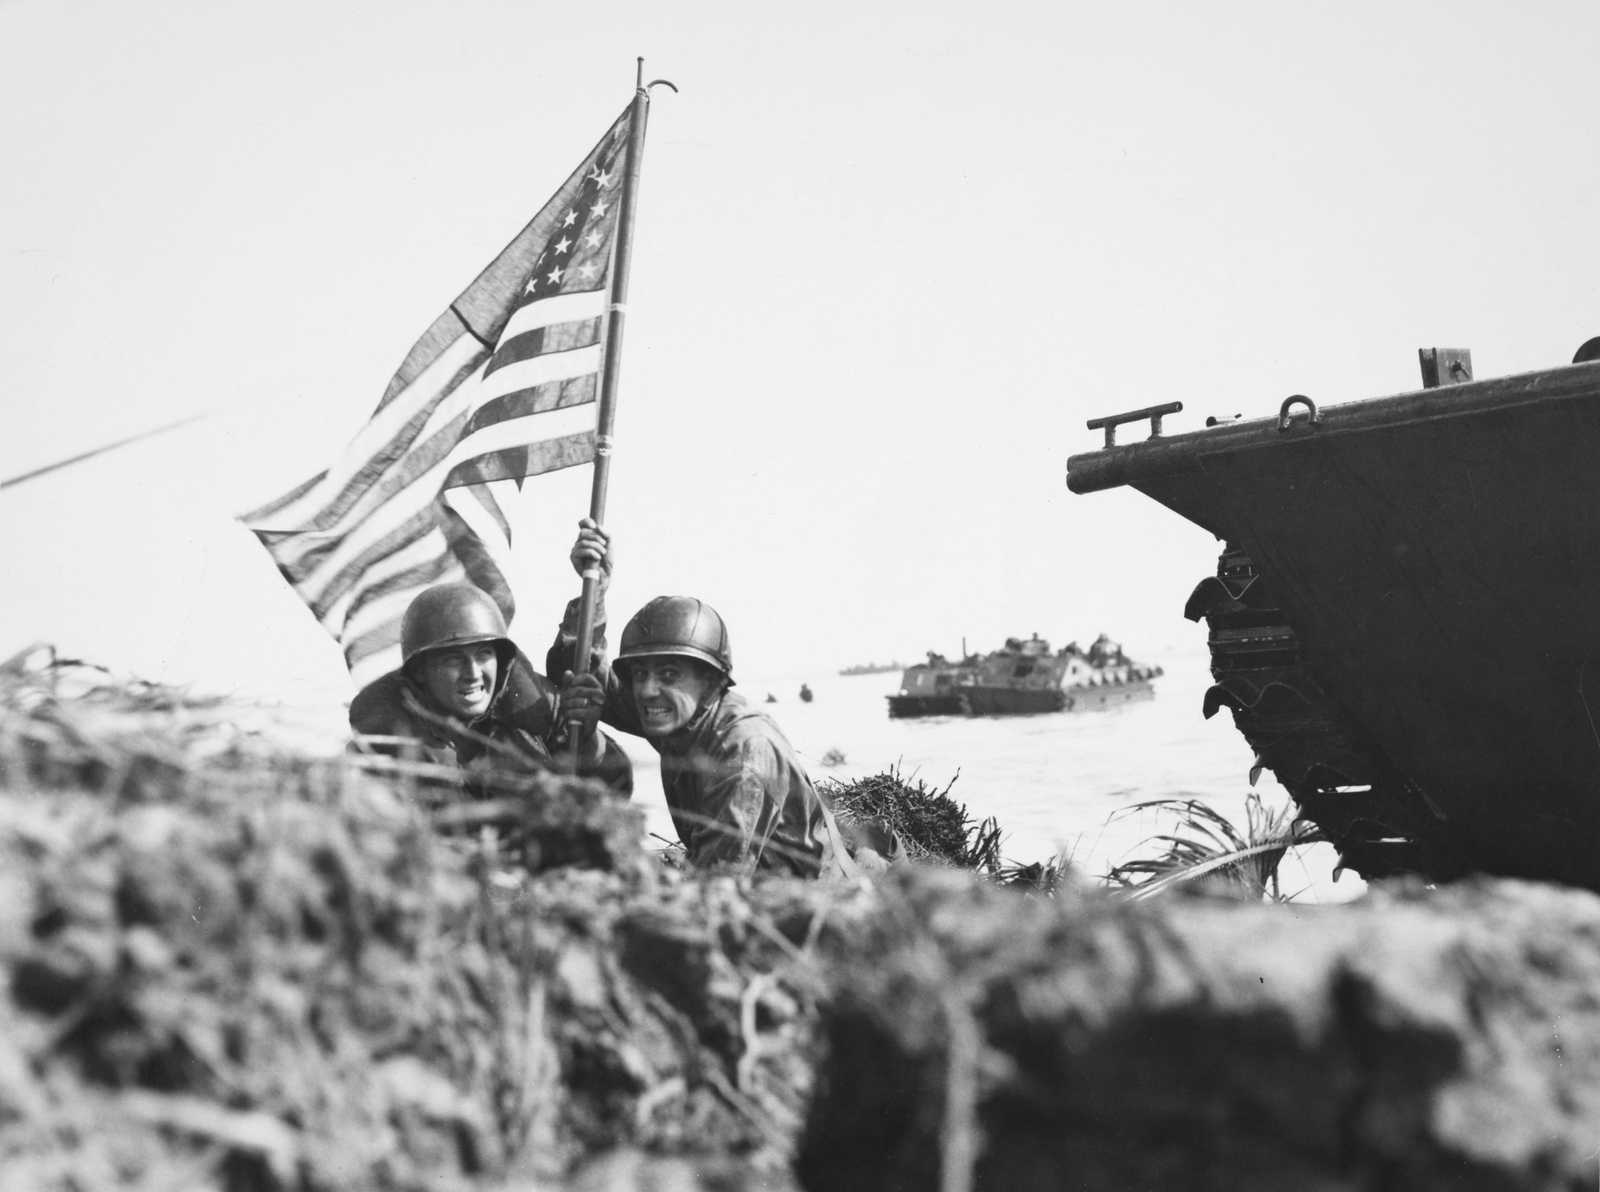 Photo of two soldiers landing on a beach raising an American flag, with water and ships in the background